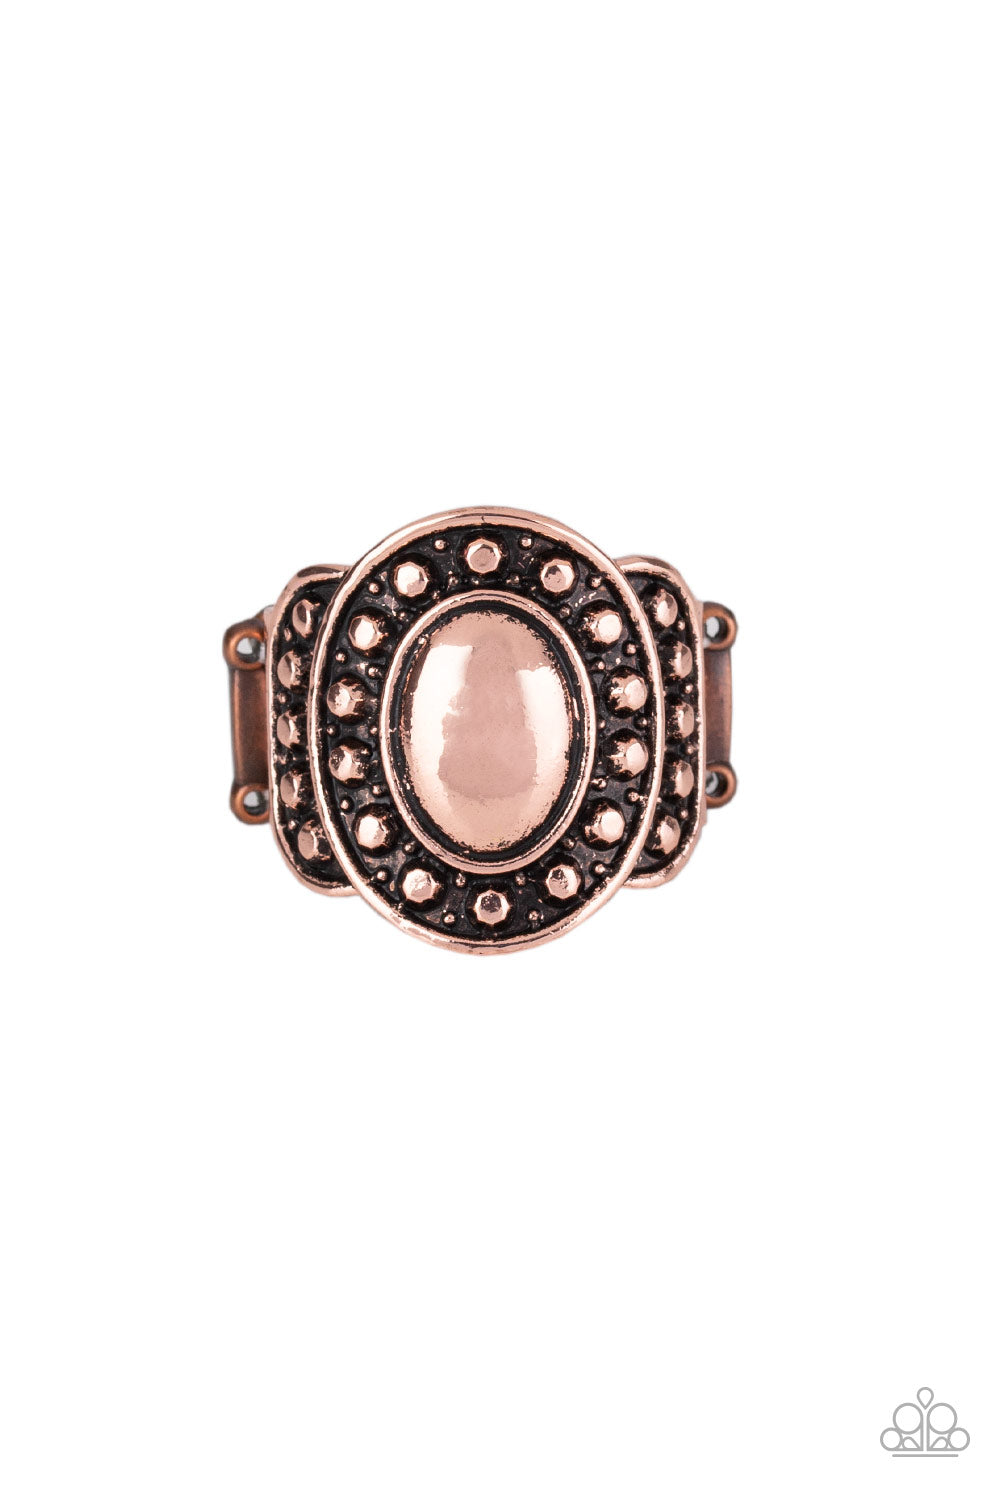 Stacked Stunner - Copper - VJ Bedazzled Jewelry